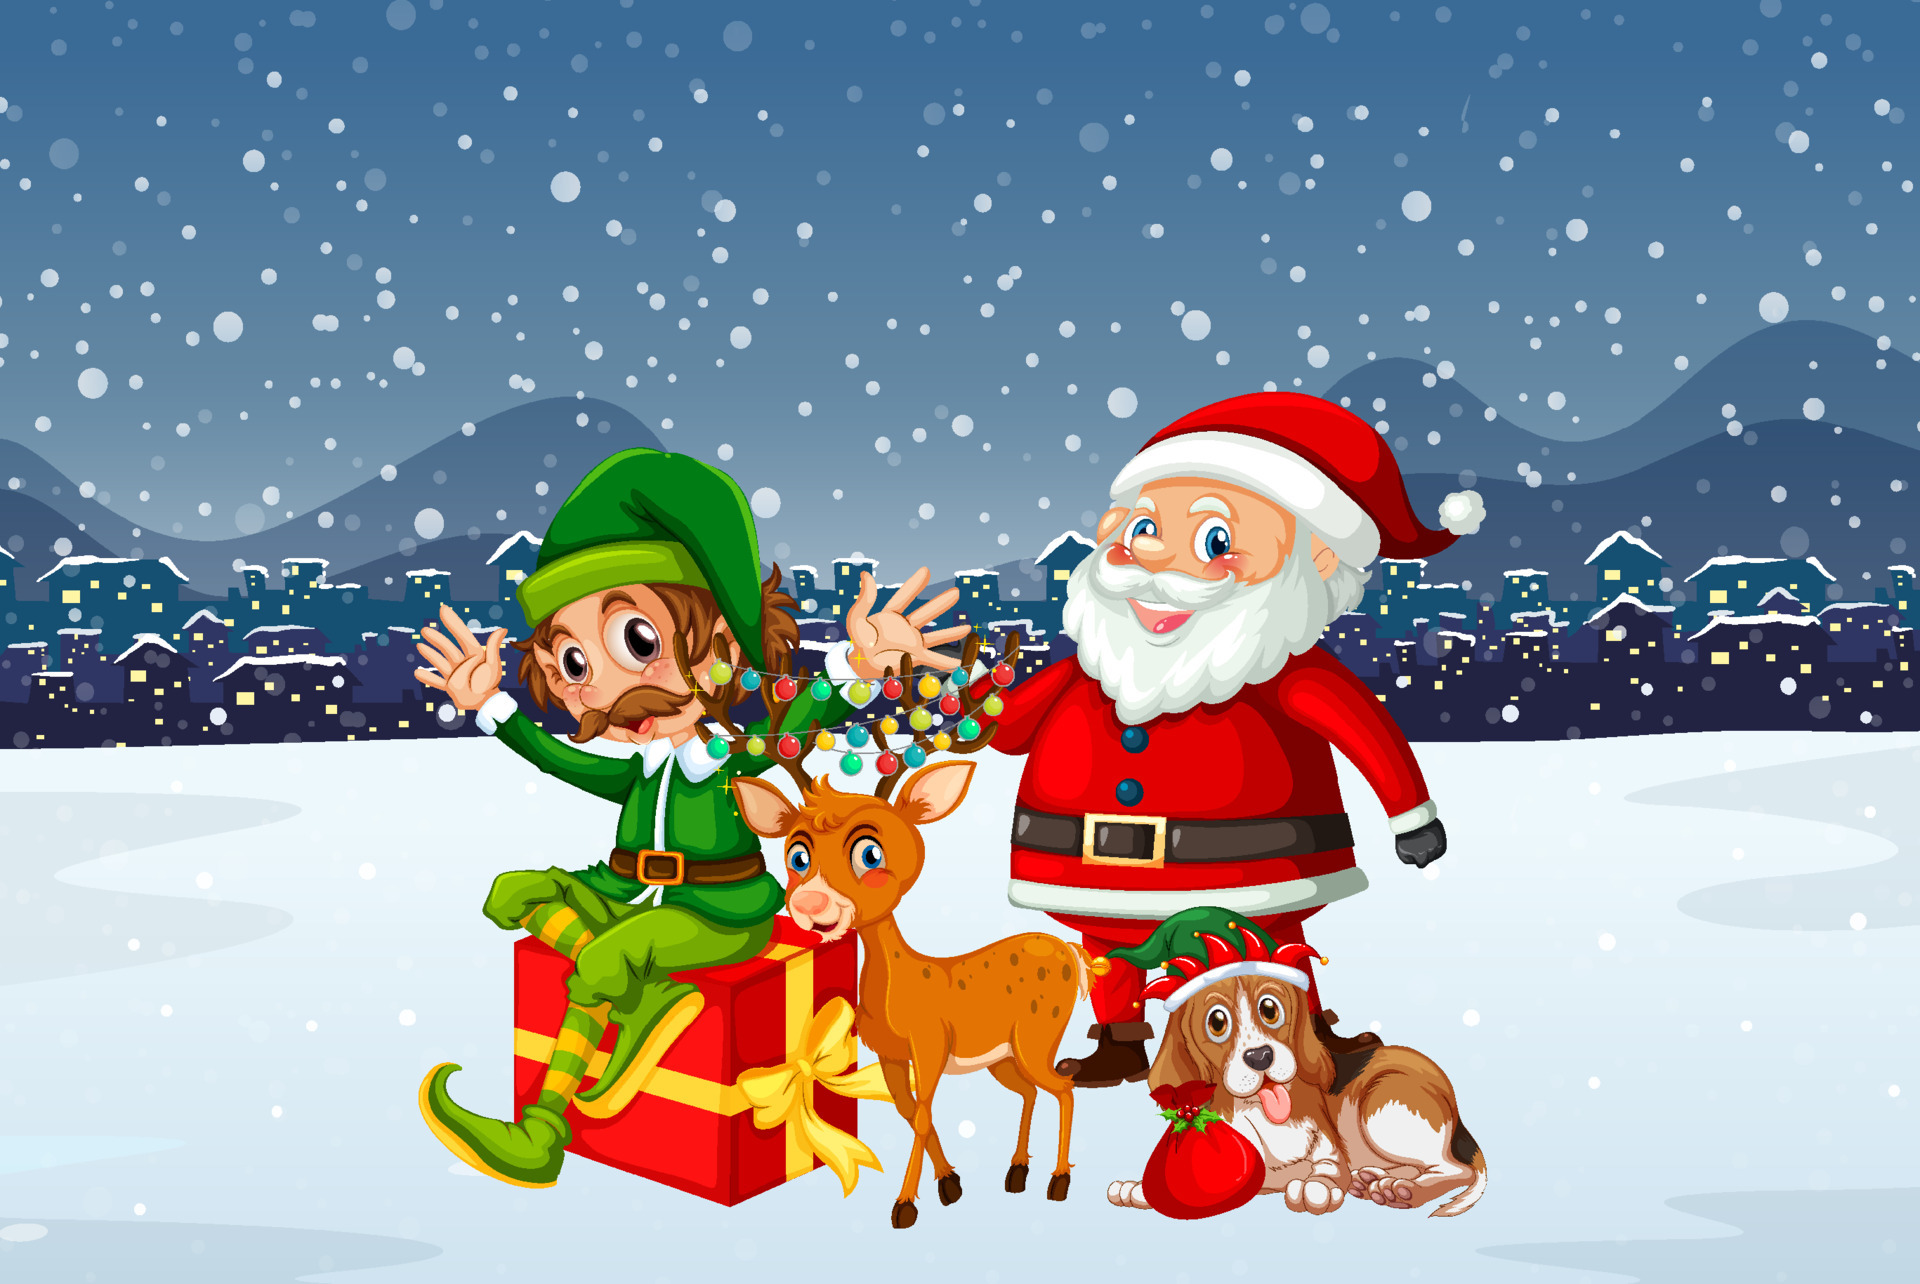 Snowy Christmas night scene with Santa Claus and friends 6769504 Vector ...